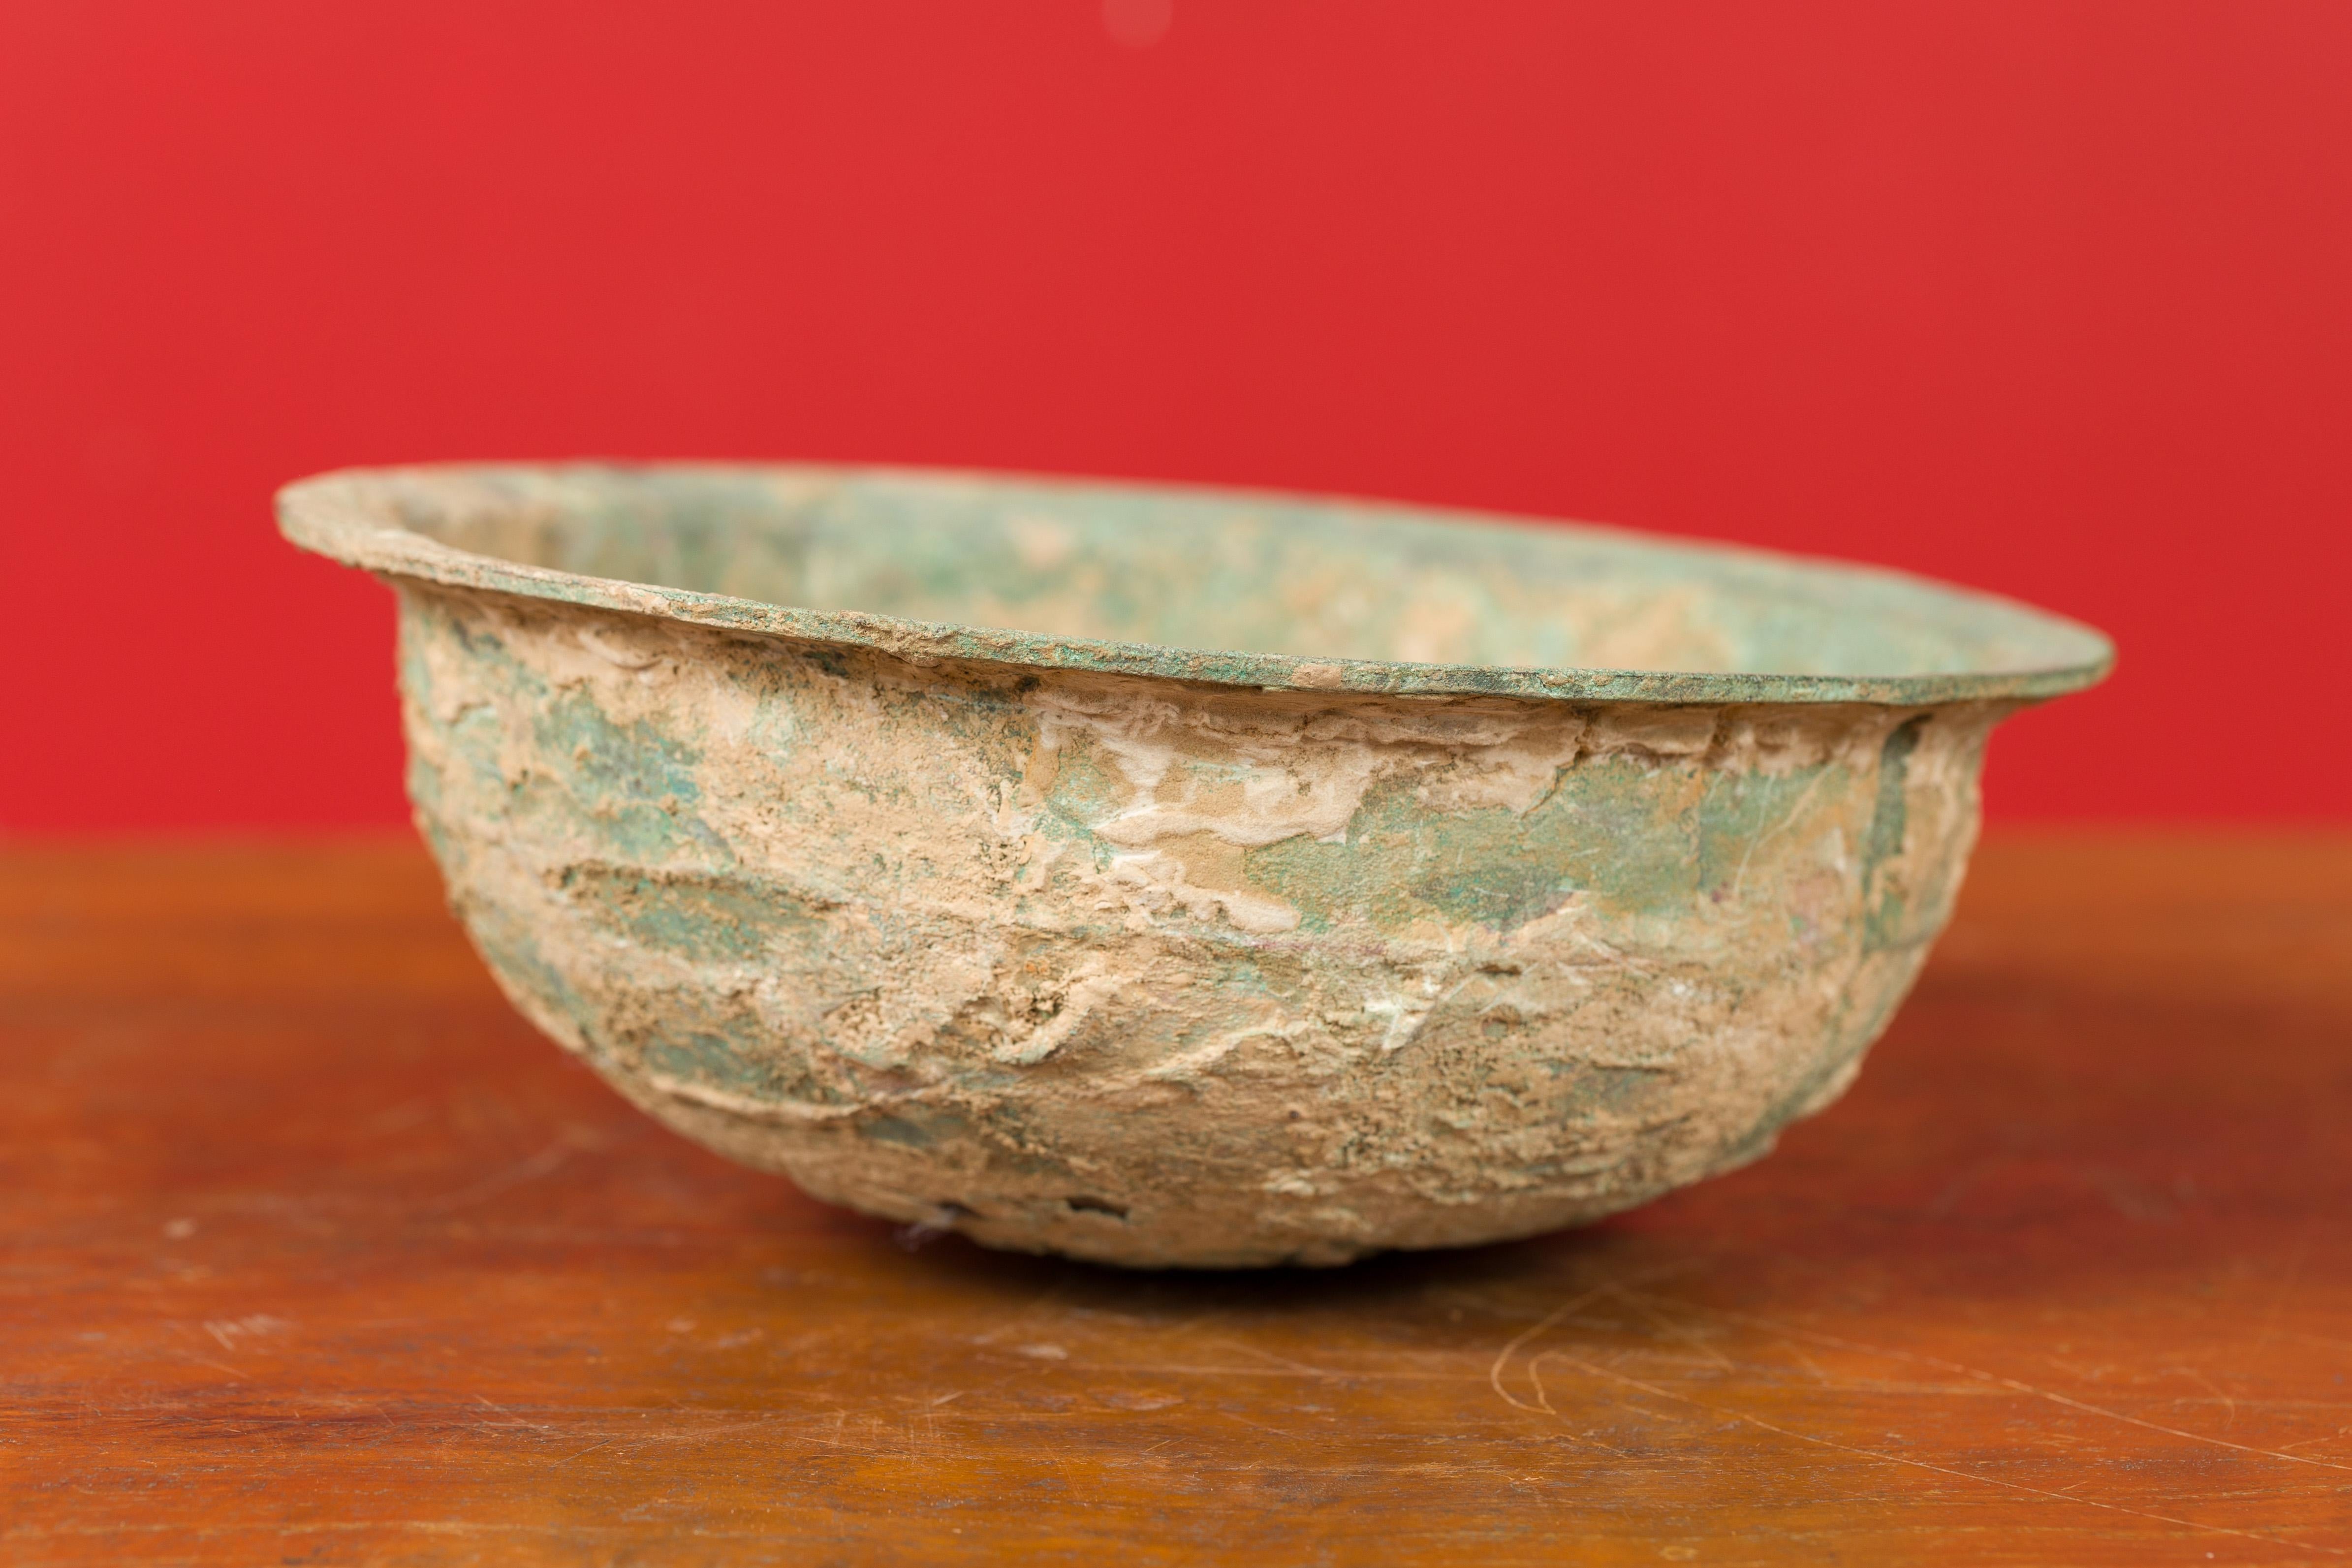 Chinese Han Dynasty Bronze Bowl circa 202 BC-200 AD with Mineral Deposits 6